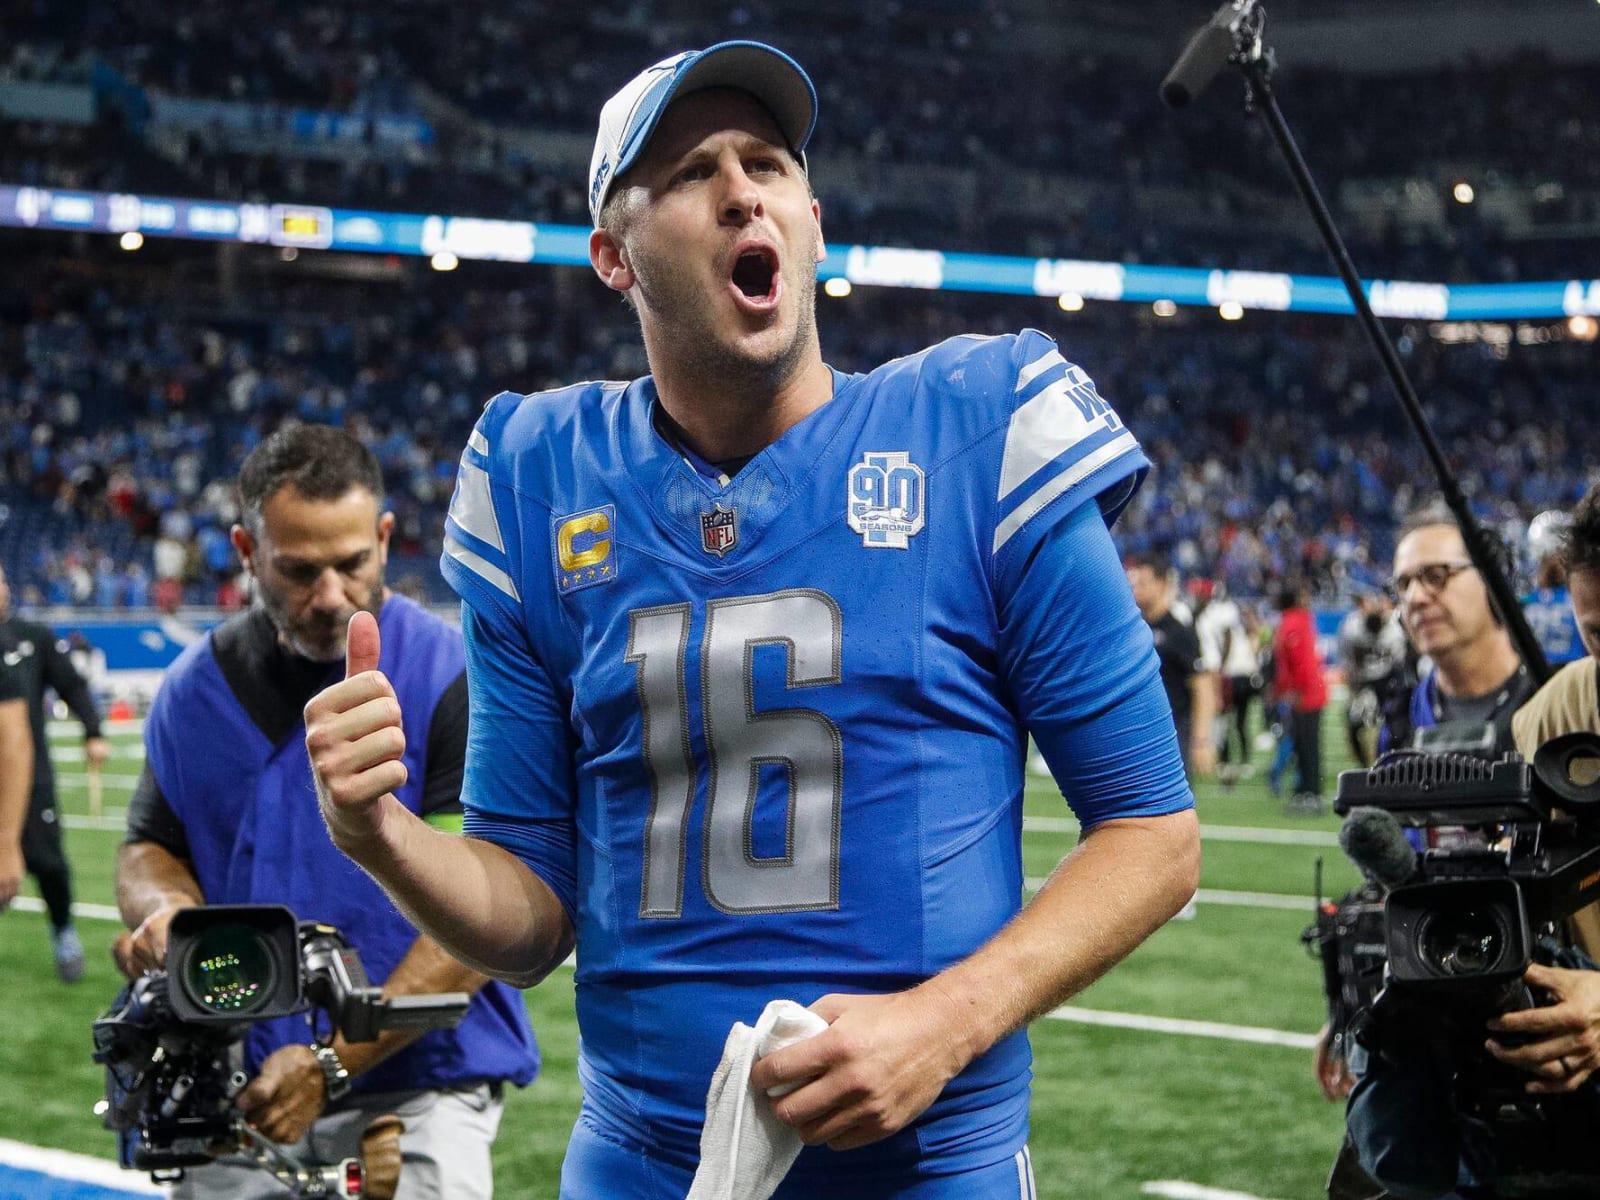 NFL News: Jared Goff Turns the Tide, How the Unexpected Star is REVIVING Detroit Lions’ Football Dreams